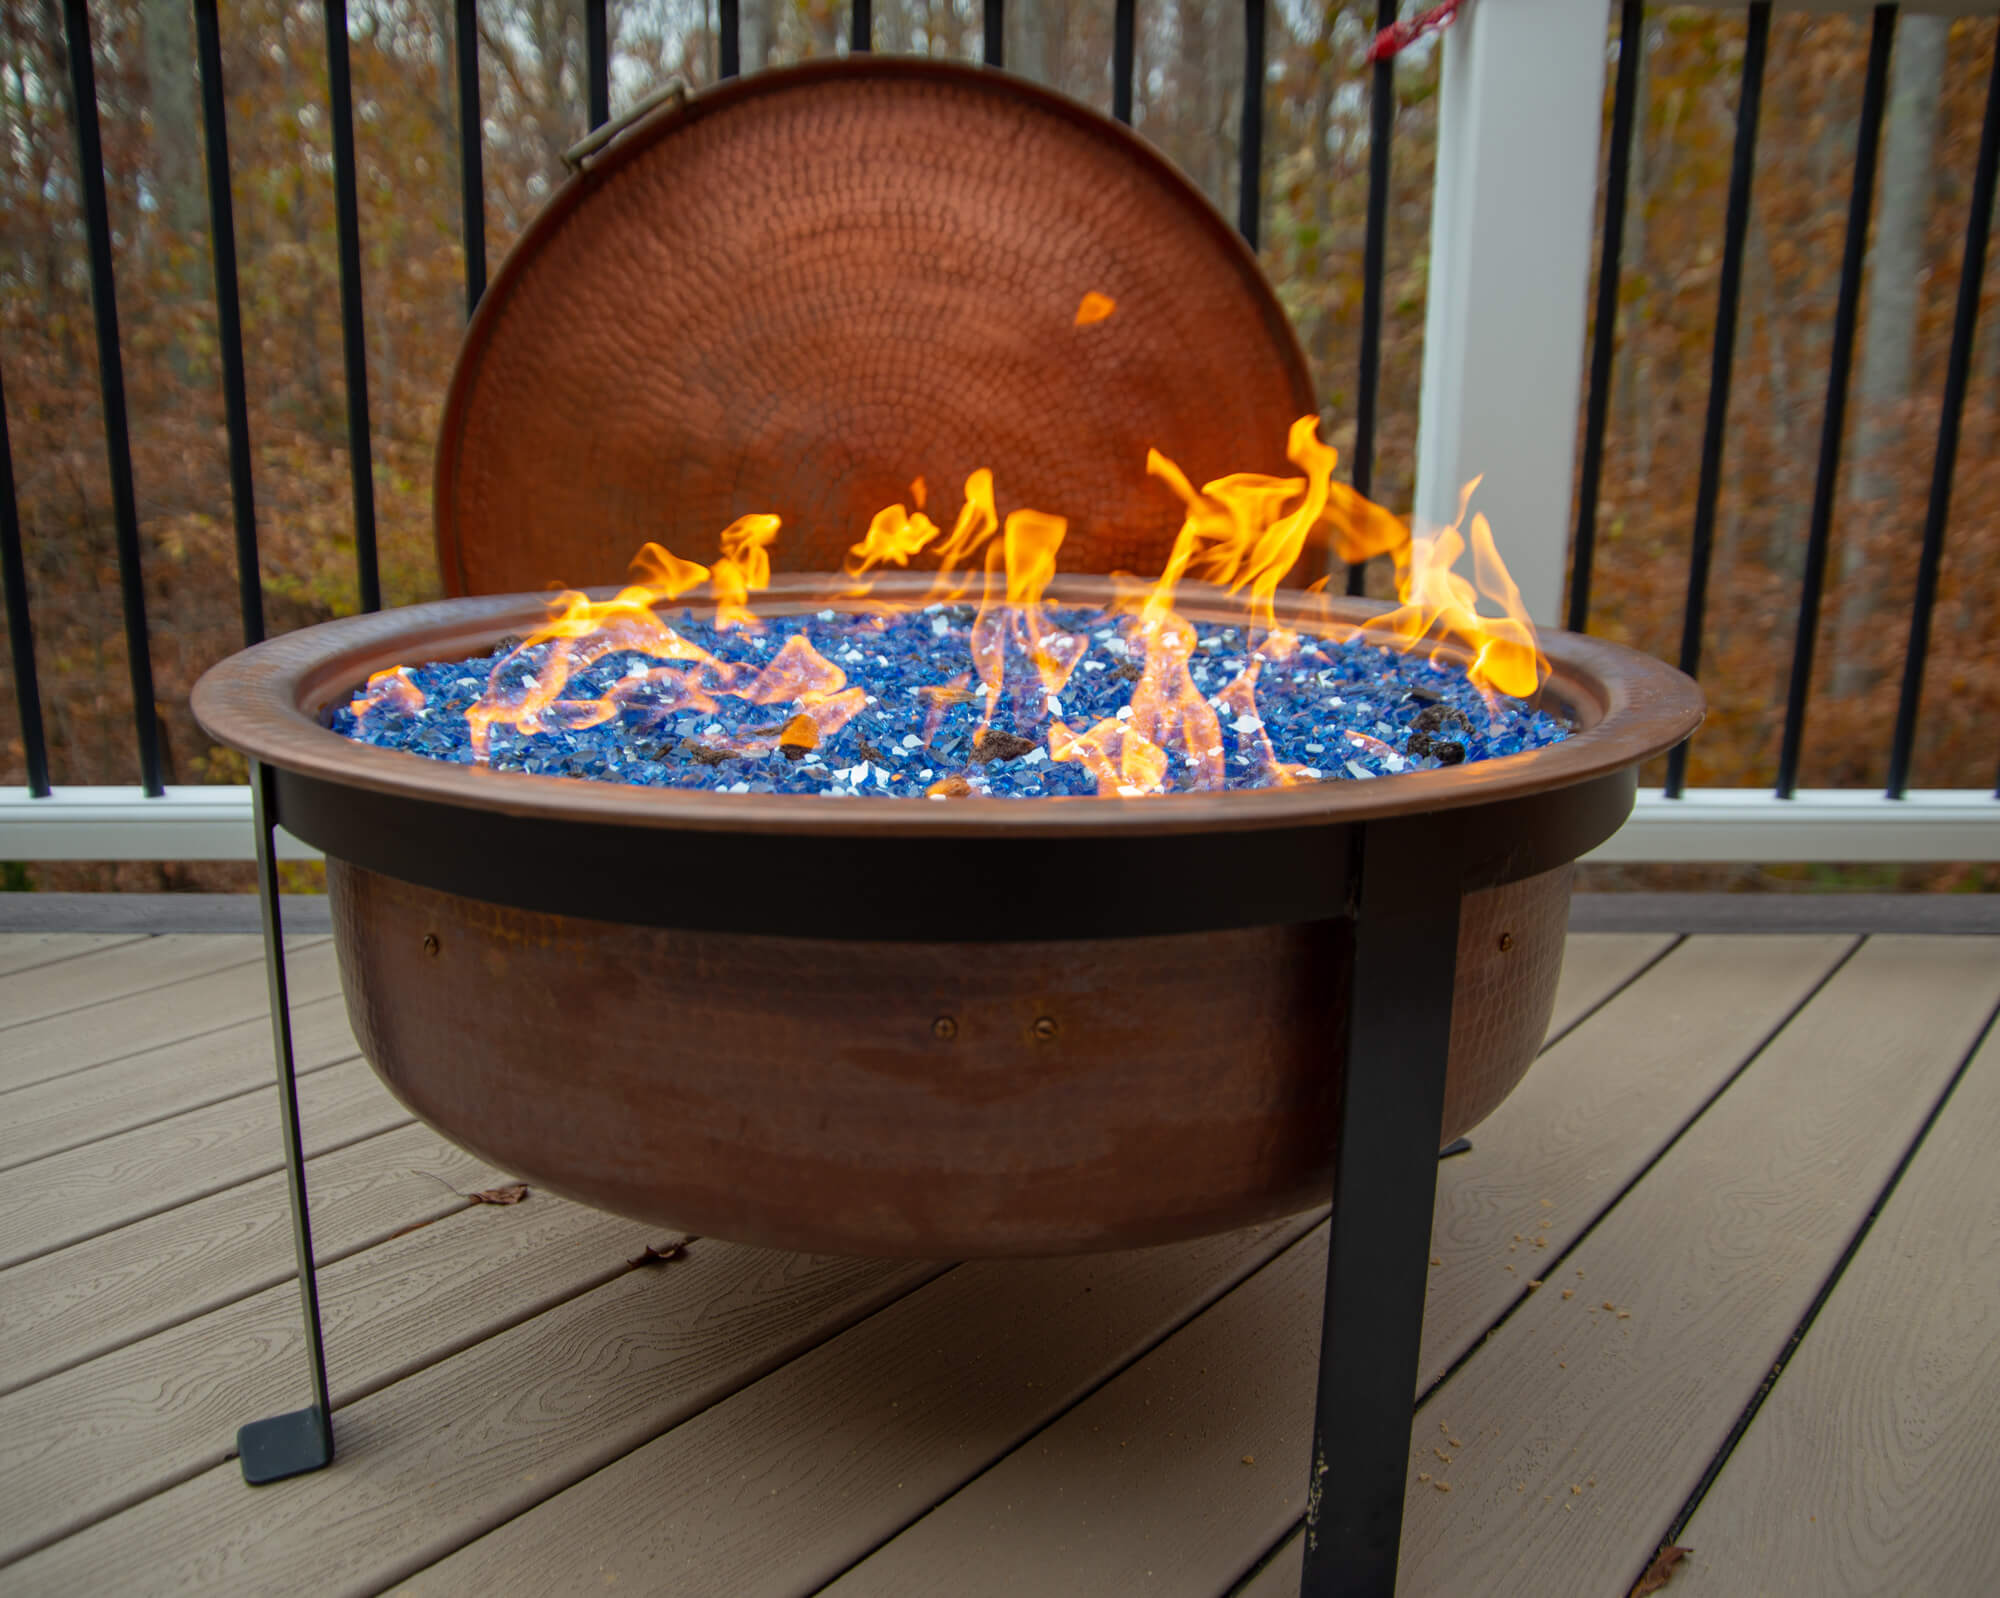 6 Ways To Put A Fire Pit On Wooden Deck, Fire Pit For Deck Use